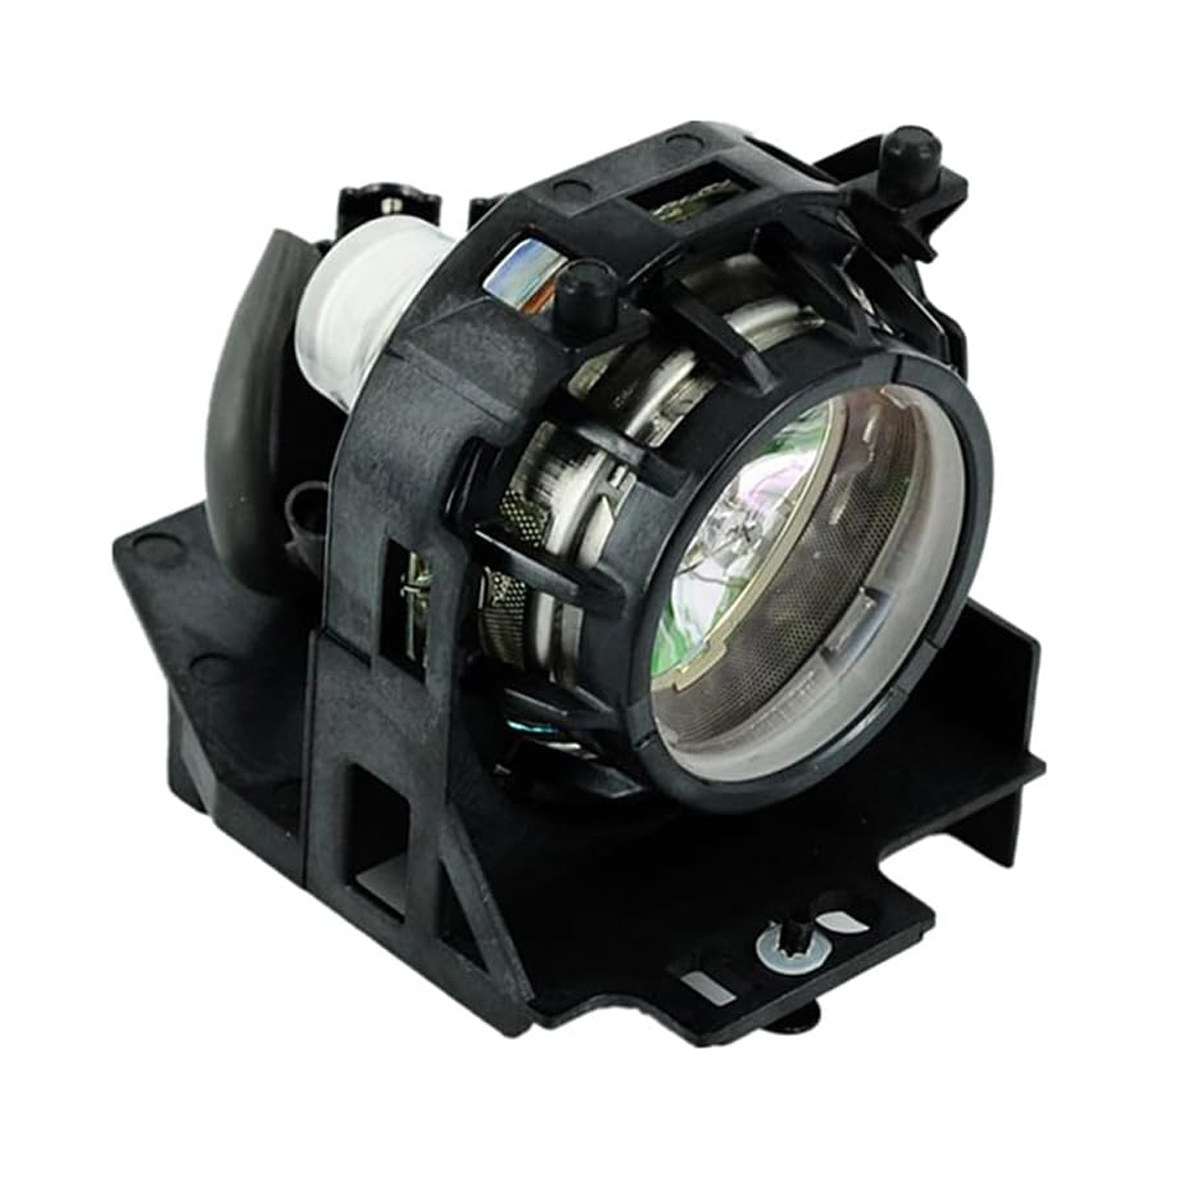 Replacement Projector lamp DT00621 For Hitachi CP-S235 HS900